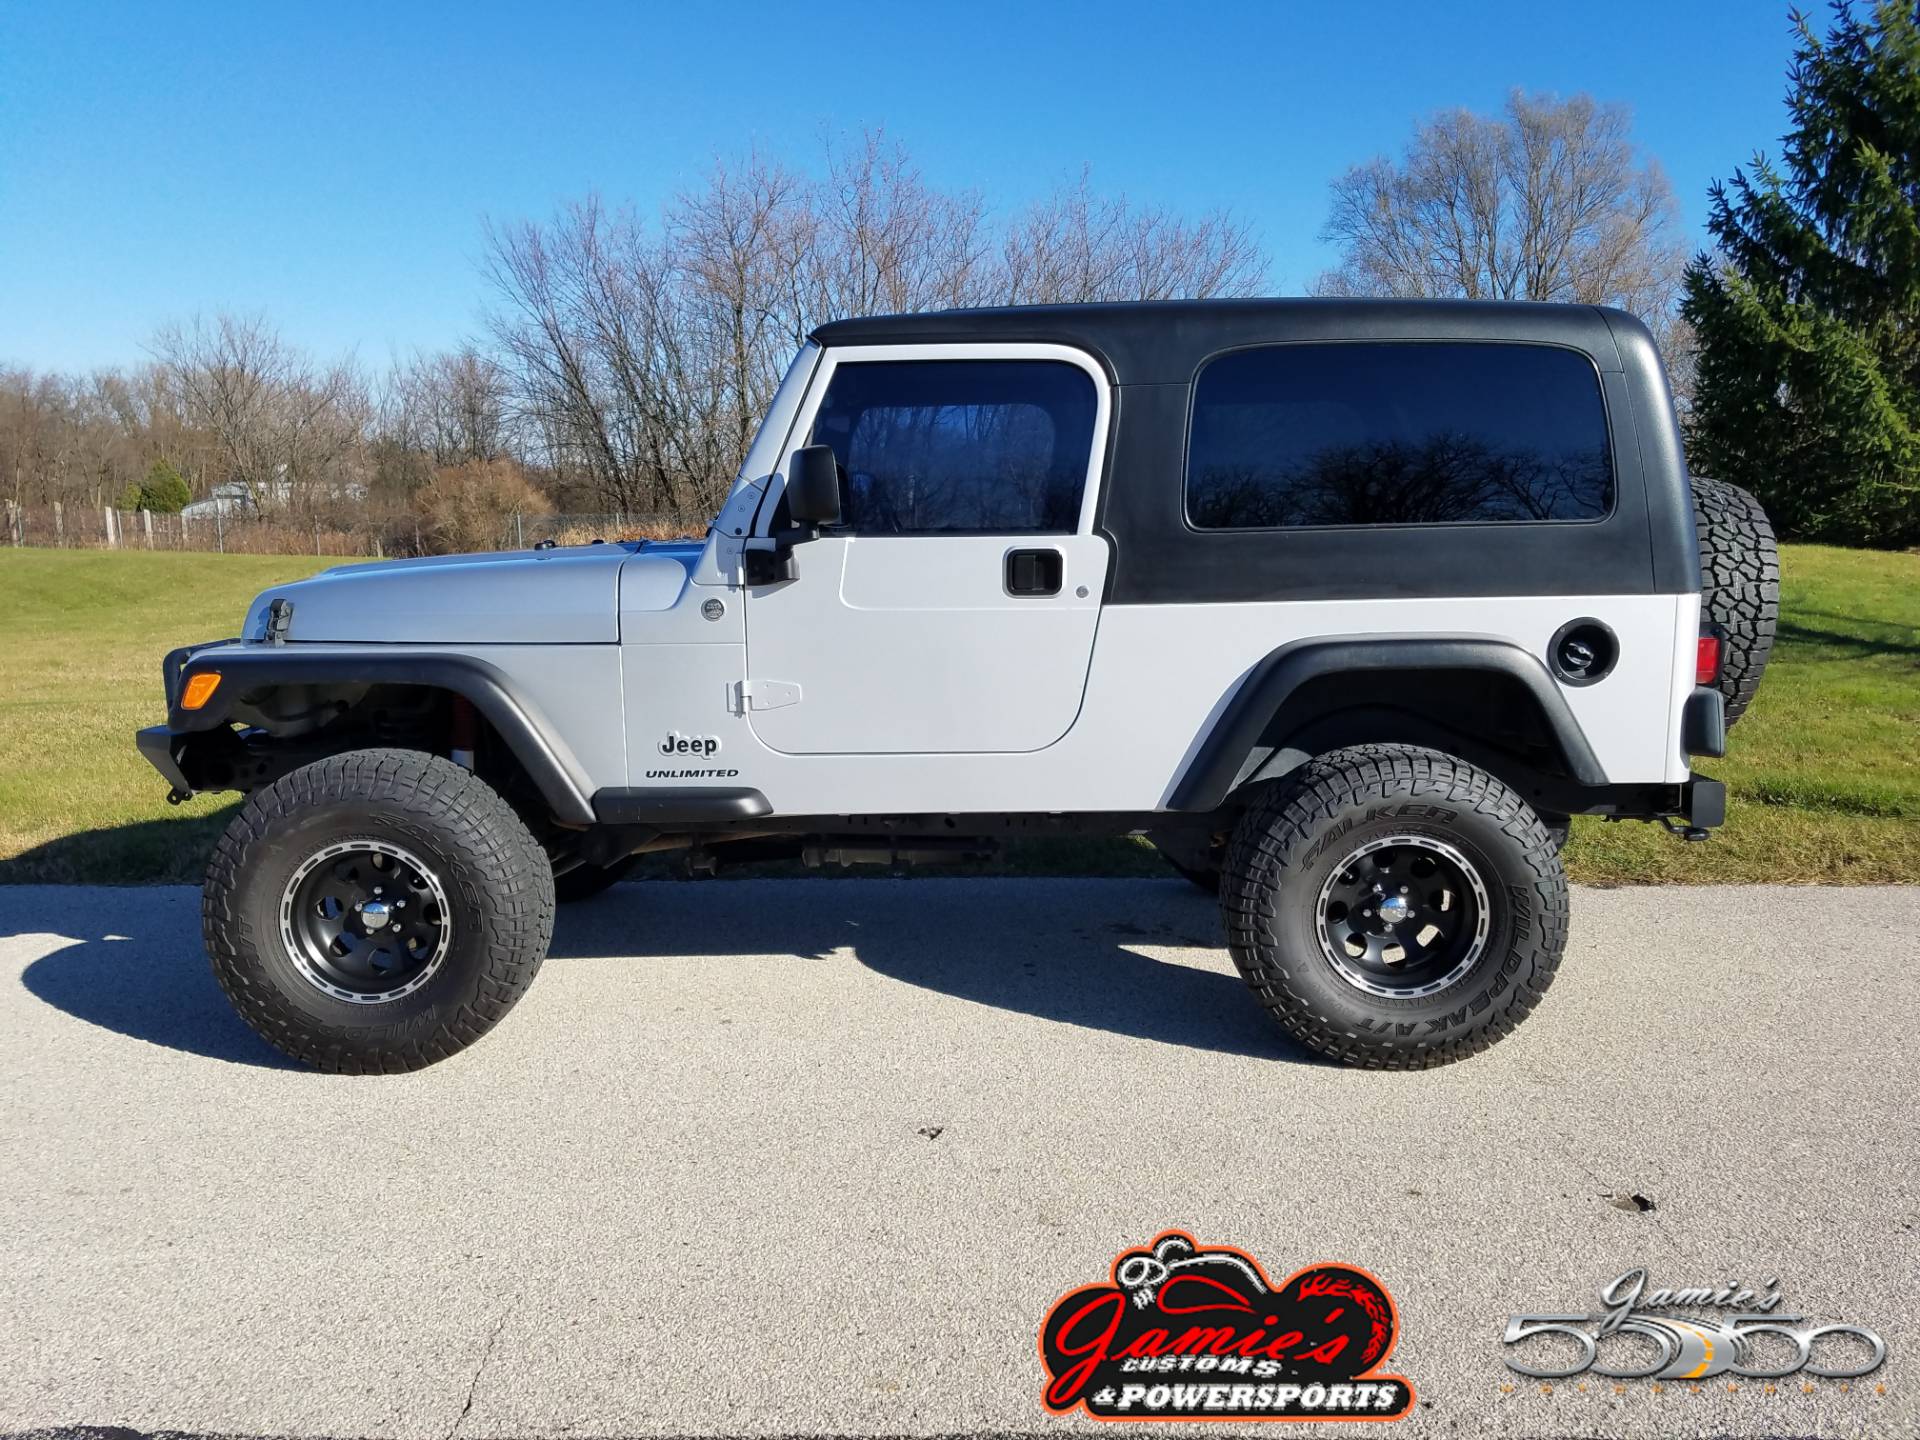 Used 2006 Jeep® Wrangler Unlimited | Automobile in Big Bend WI | 4307  Bright Silver Metallic